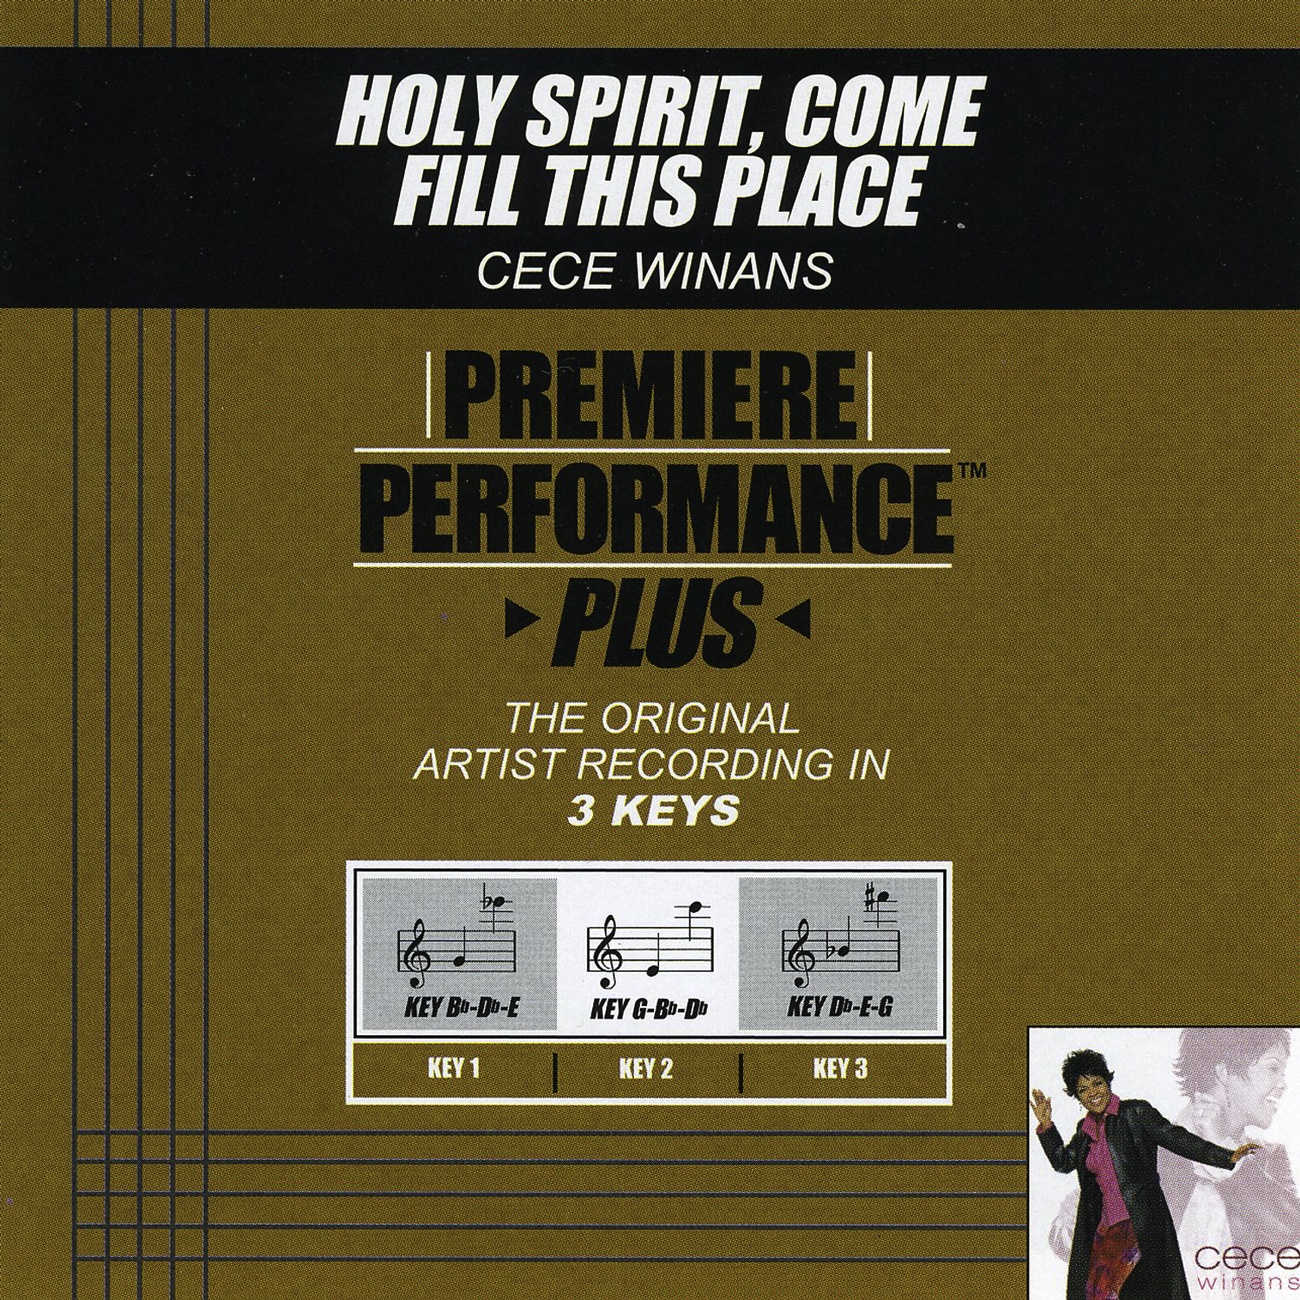 Holy Spirit, Come Fill This Place (Premiere Performance Plus Track)